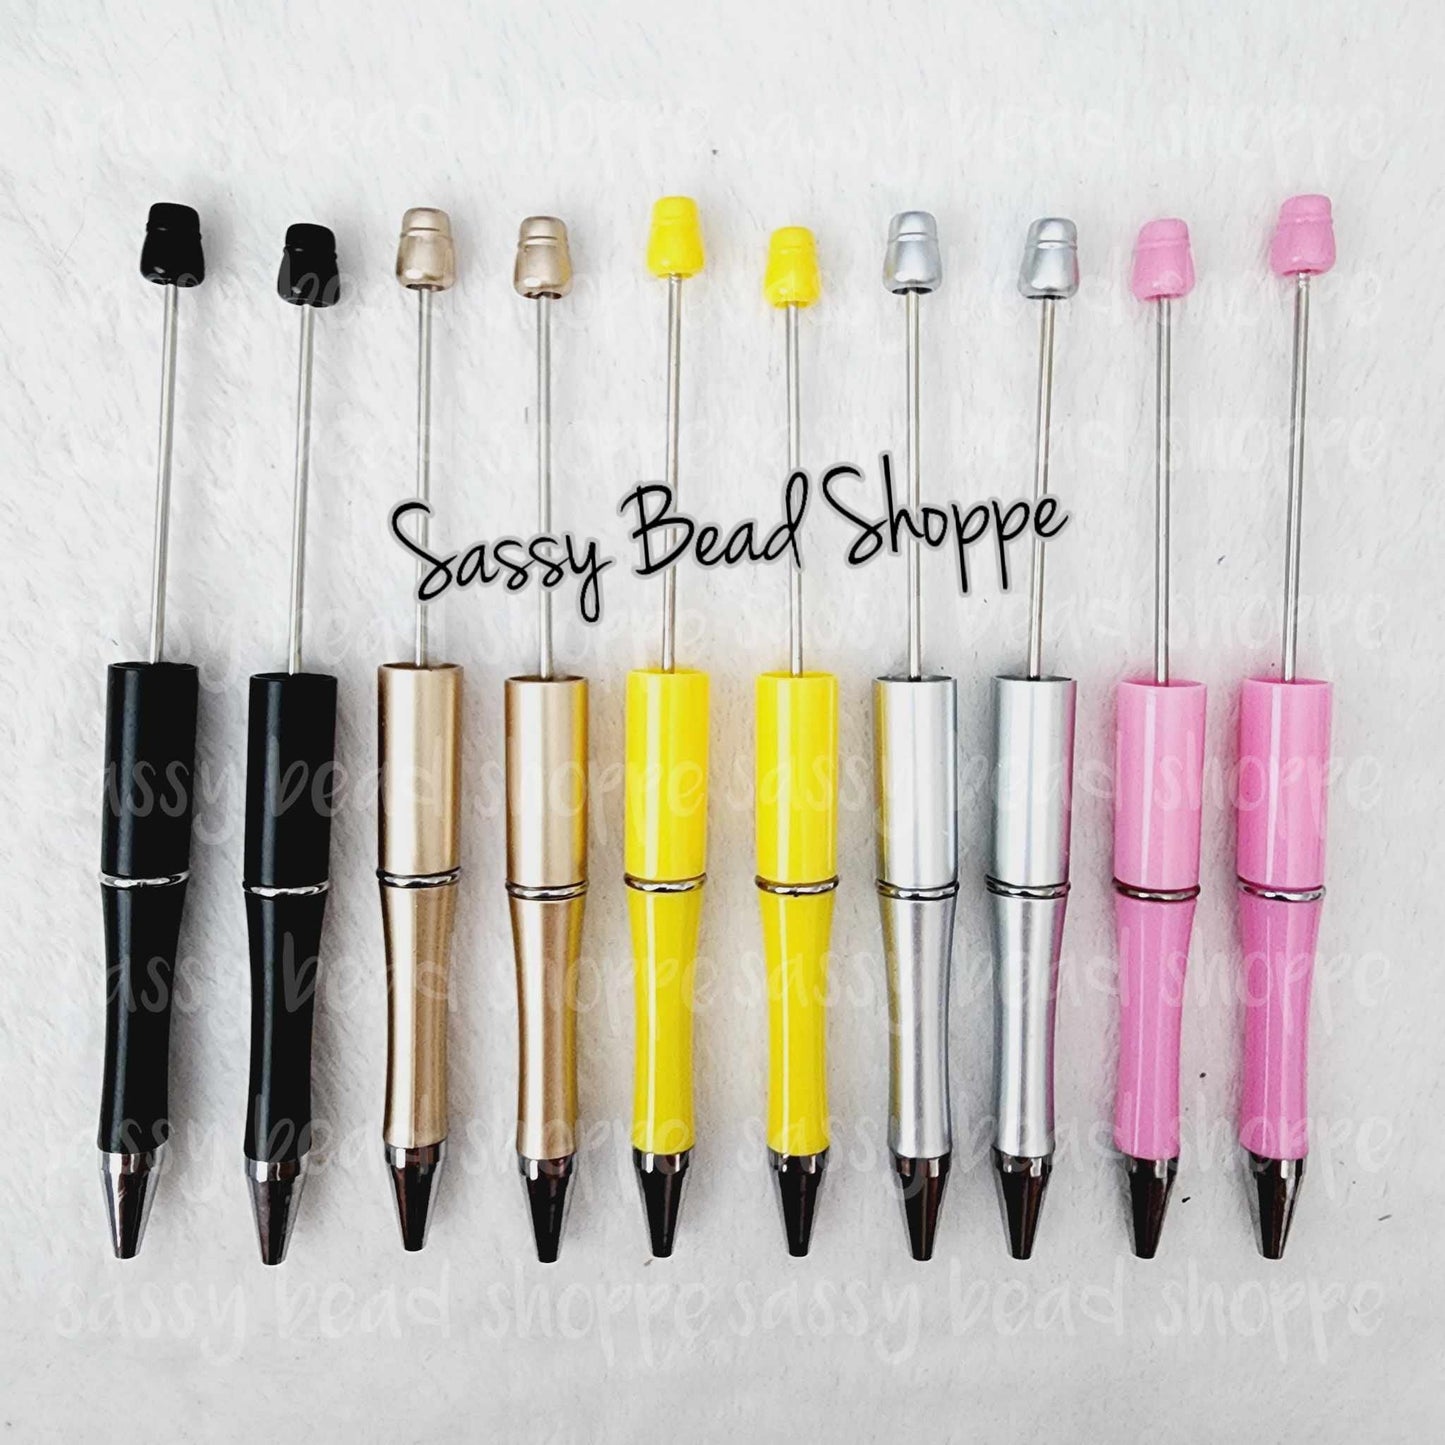 Sassy Bead Shoppe Delightful Pencil Pen Pack Pack of 10